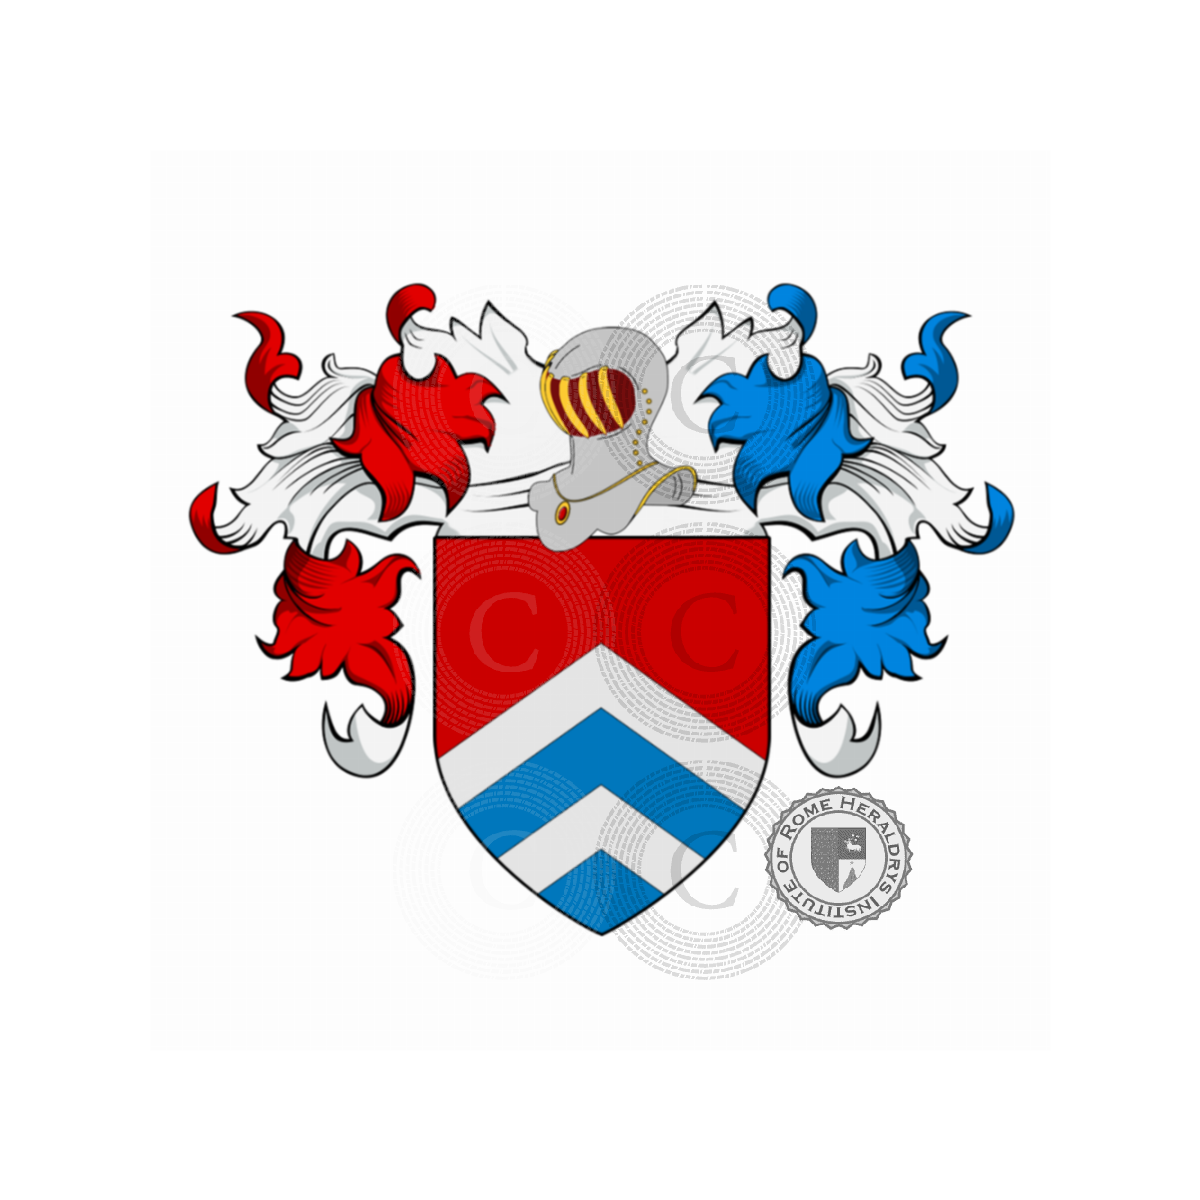 Coat of arms of familyNicolis